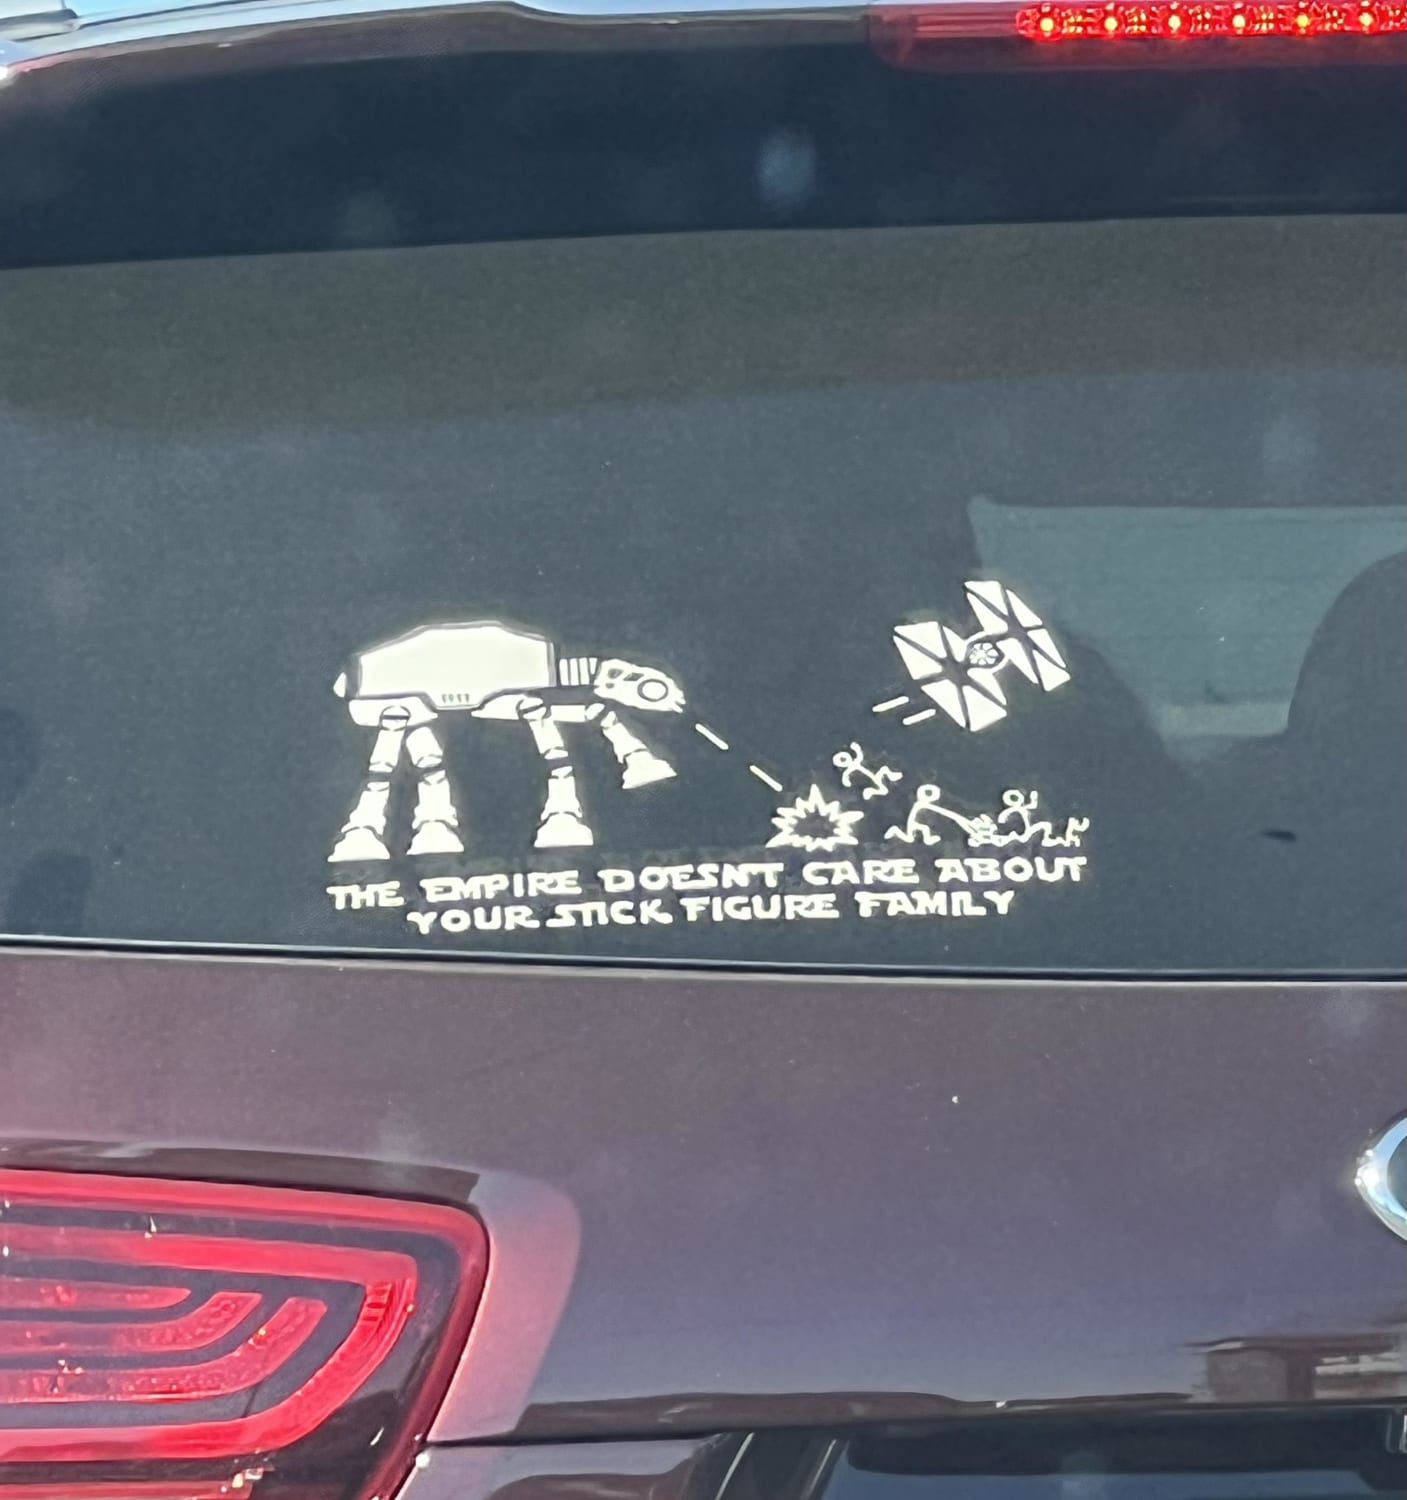 Not your typical stick figure family sticker…